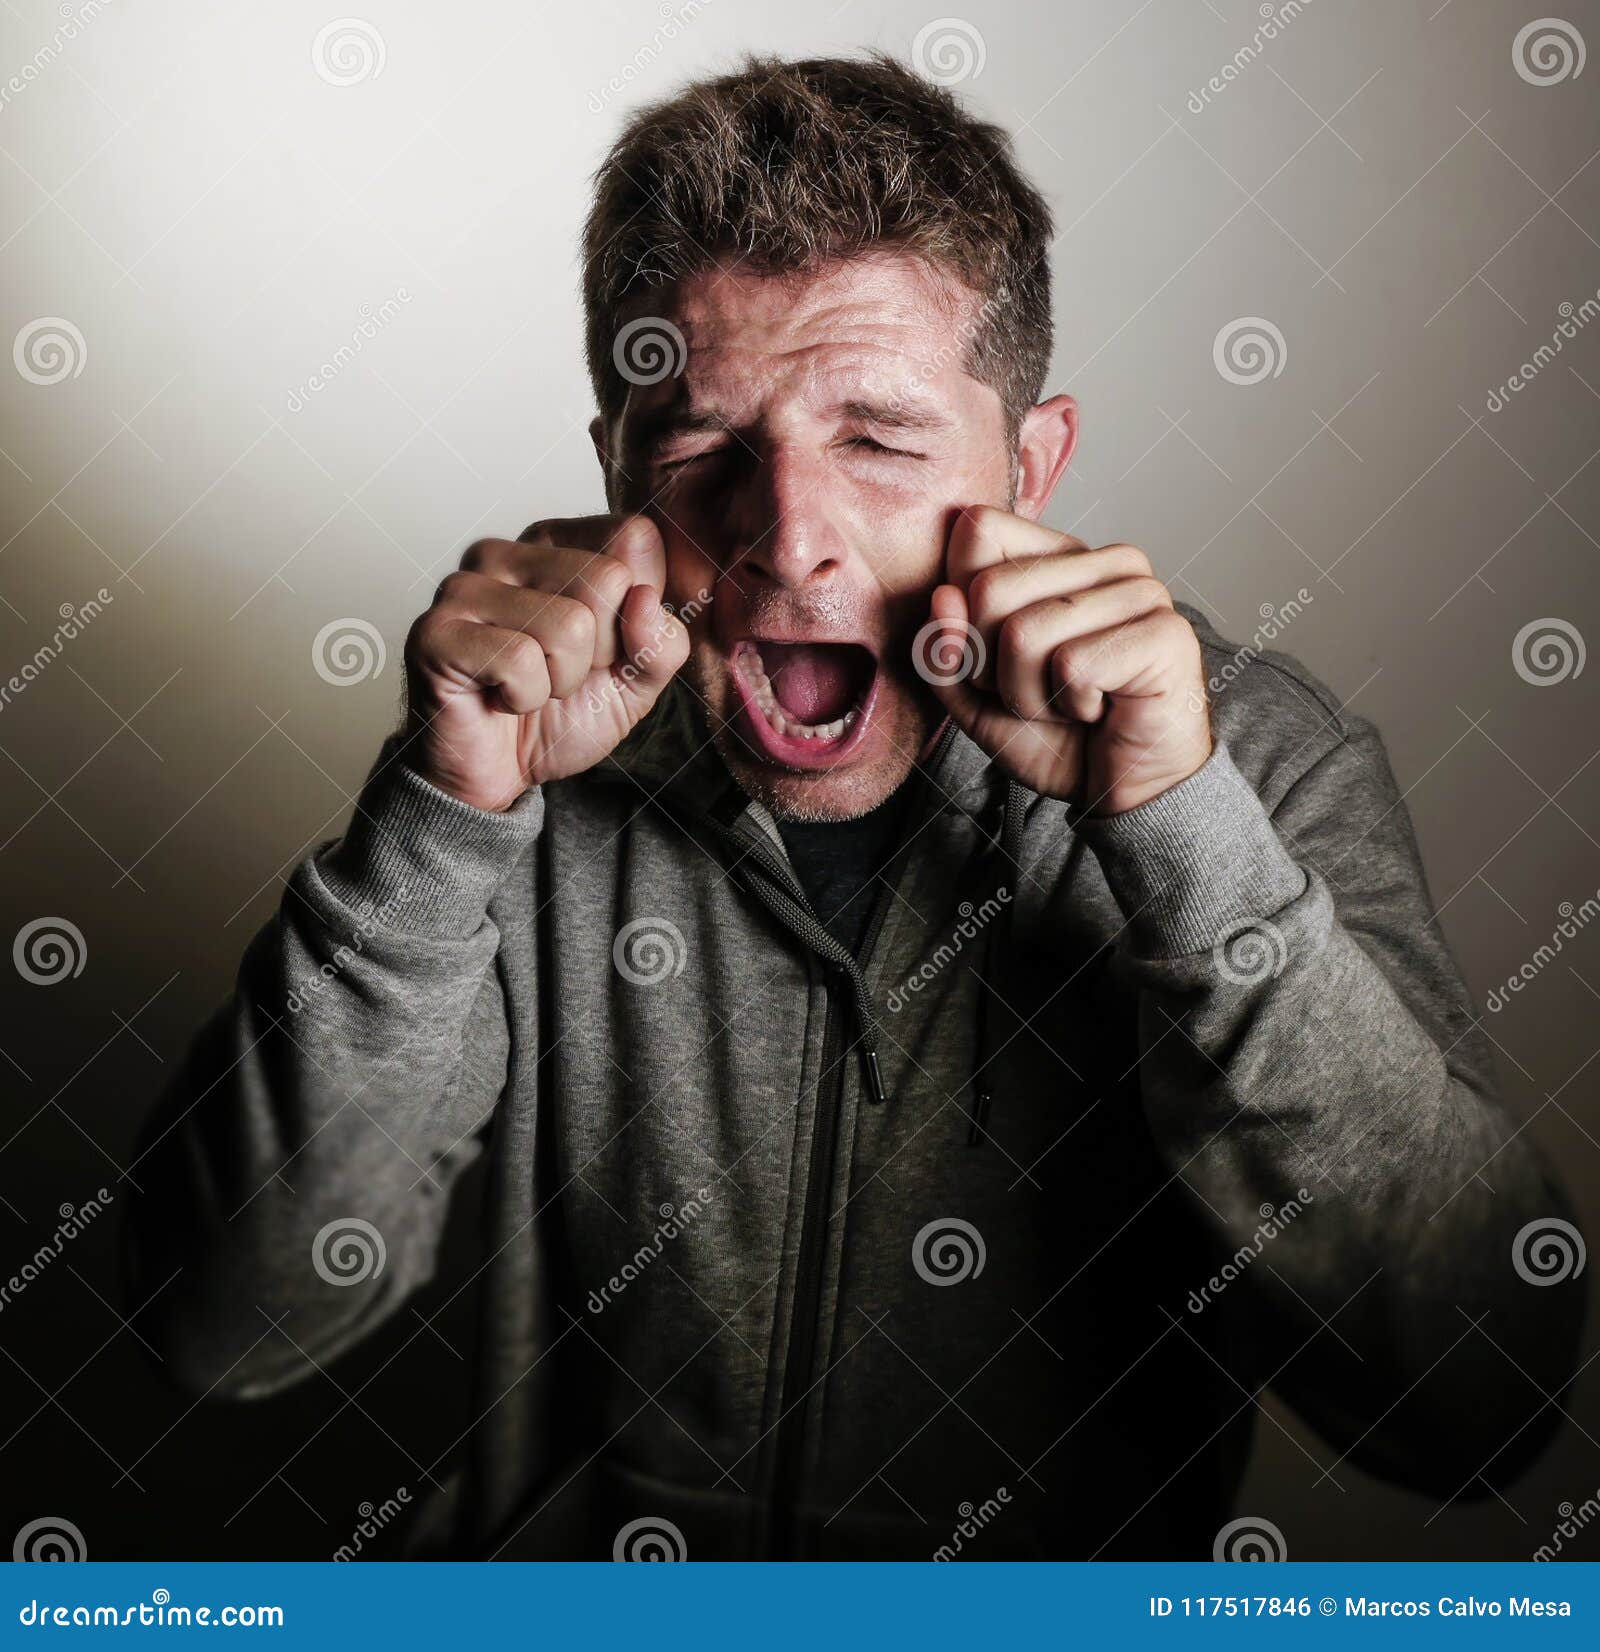 Funny and Hilarious Portrait of Young Sad Man in Overact Crying Gesture  with Hands on Eyes Screaming Mocking the Cry of a Kid Isol Stock Photo -  Image of male, dramatic: 117517846